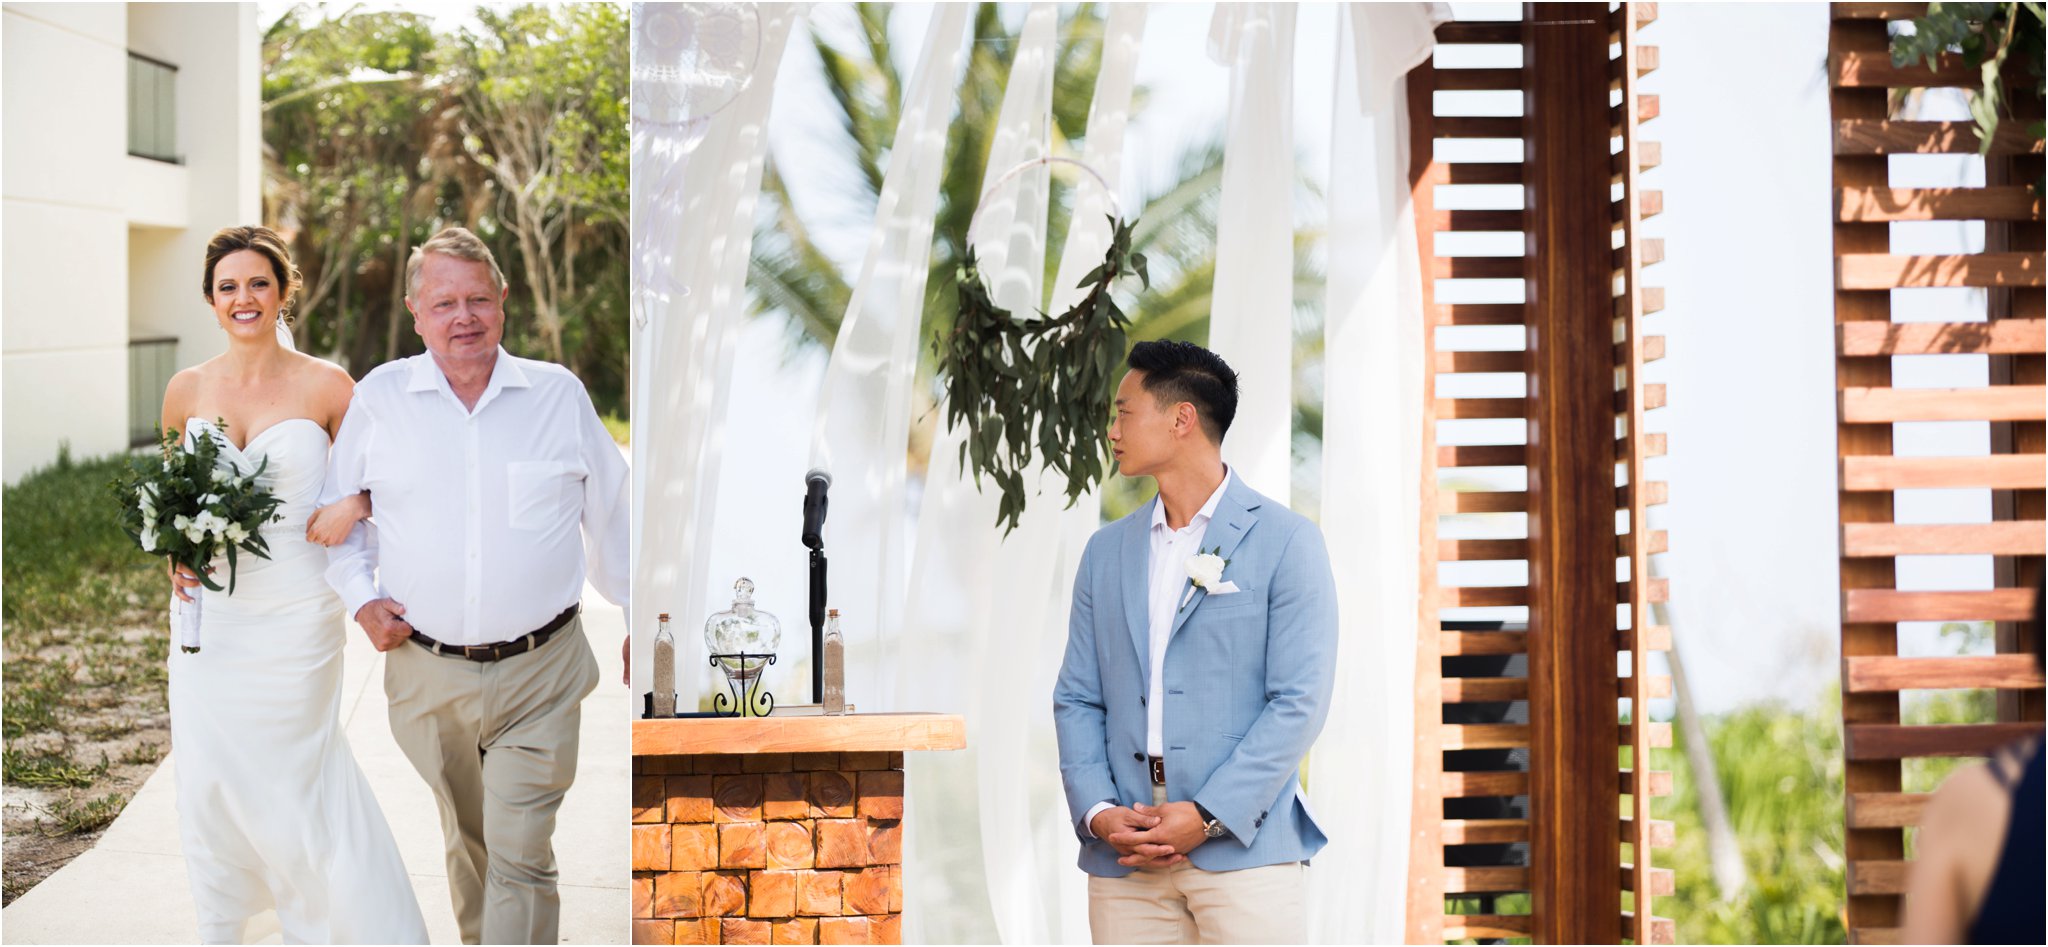 images by feliciathephotographer.com | Destination Beach Wedding | Unicco 20 87 | Photographer | L&S Travel | ceremony | ocean view | palm trees | walking down the isle | father giving away daughter | groom waiting for bride | strapless dress | white flowers | stone altar 